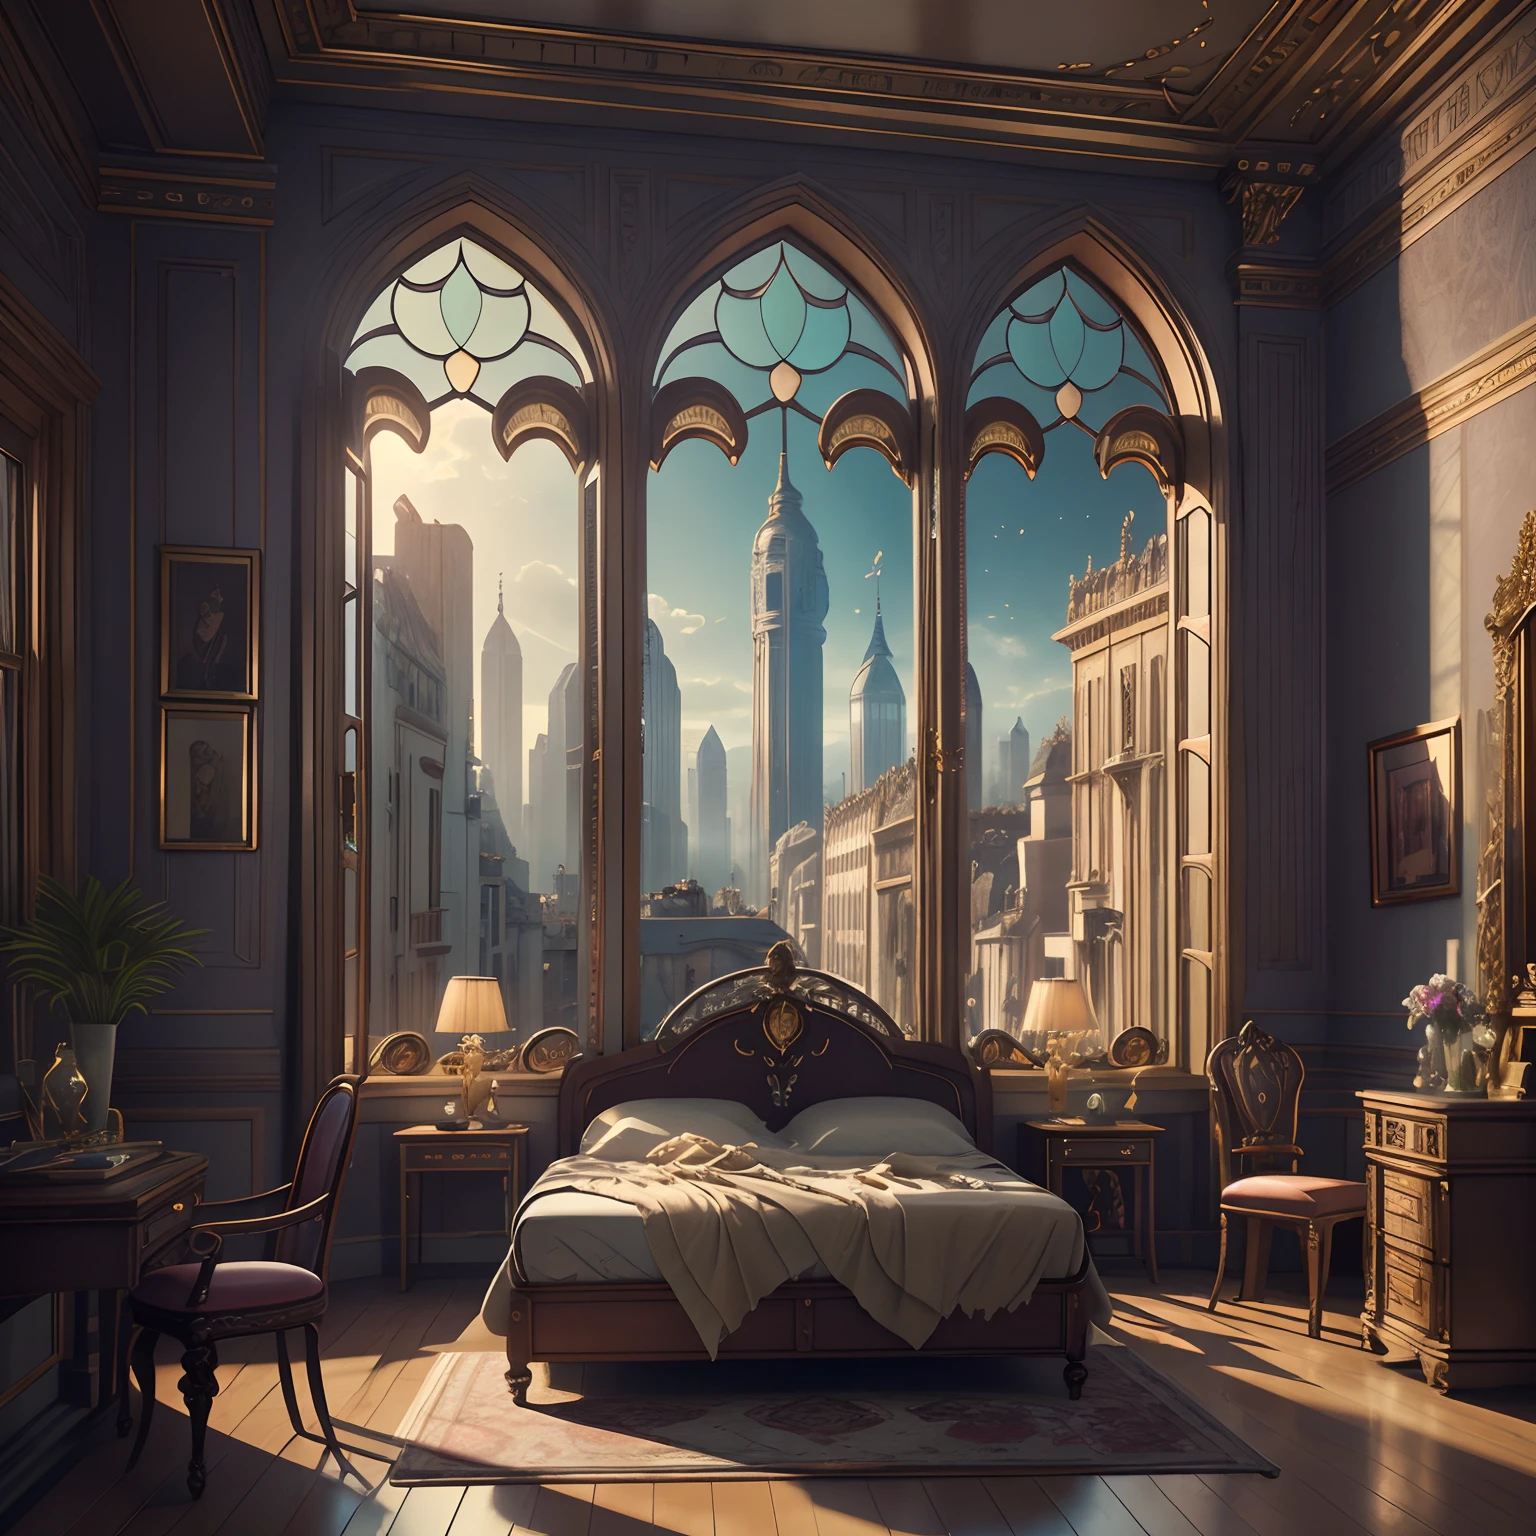 (((Generate an ornate bedroom in the style of Versailles with a big historical window.))) A hyperrealistic cyberpunk dreamscape cityscape is in the window. The cityscape is extremely detailed with many lights and LED neon colors and buildings of many different sizes. The cityscape has all colors of the rainbow and has hires interesting flying steampunk dirigibles. ((The cityscape is colorful.)) A giant steampunk standalone clock is seen ((through the window)). It is peaceful in the bedroom. The entire artwork is very realistic with many small details and enhancements. 3D render beeple, artstation and beeple highly, in fantasy sci-fi city, inspired by beeple, 8k, unreal engine unity CGI. Masterpiece and popular. Add many fantastical and beautiful details and nuances. (stained glass)